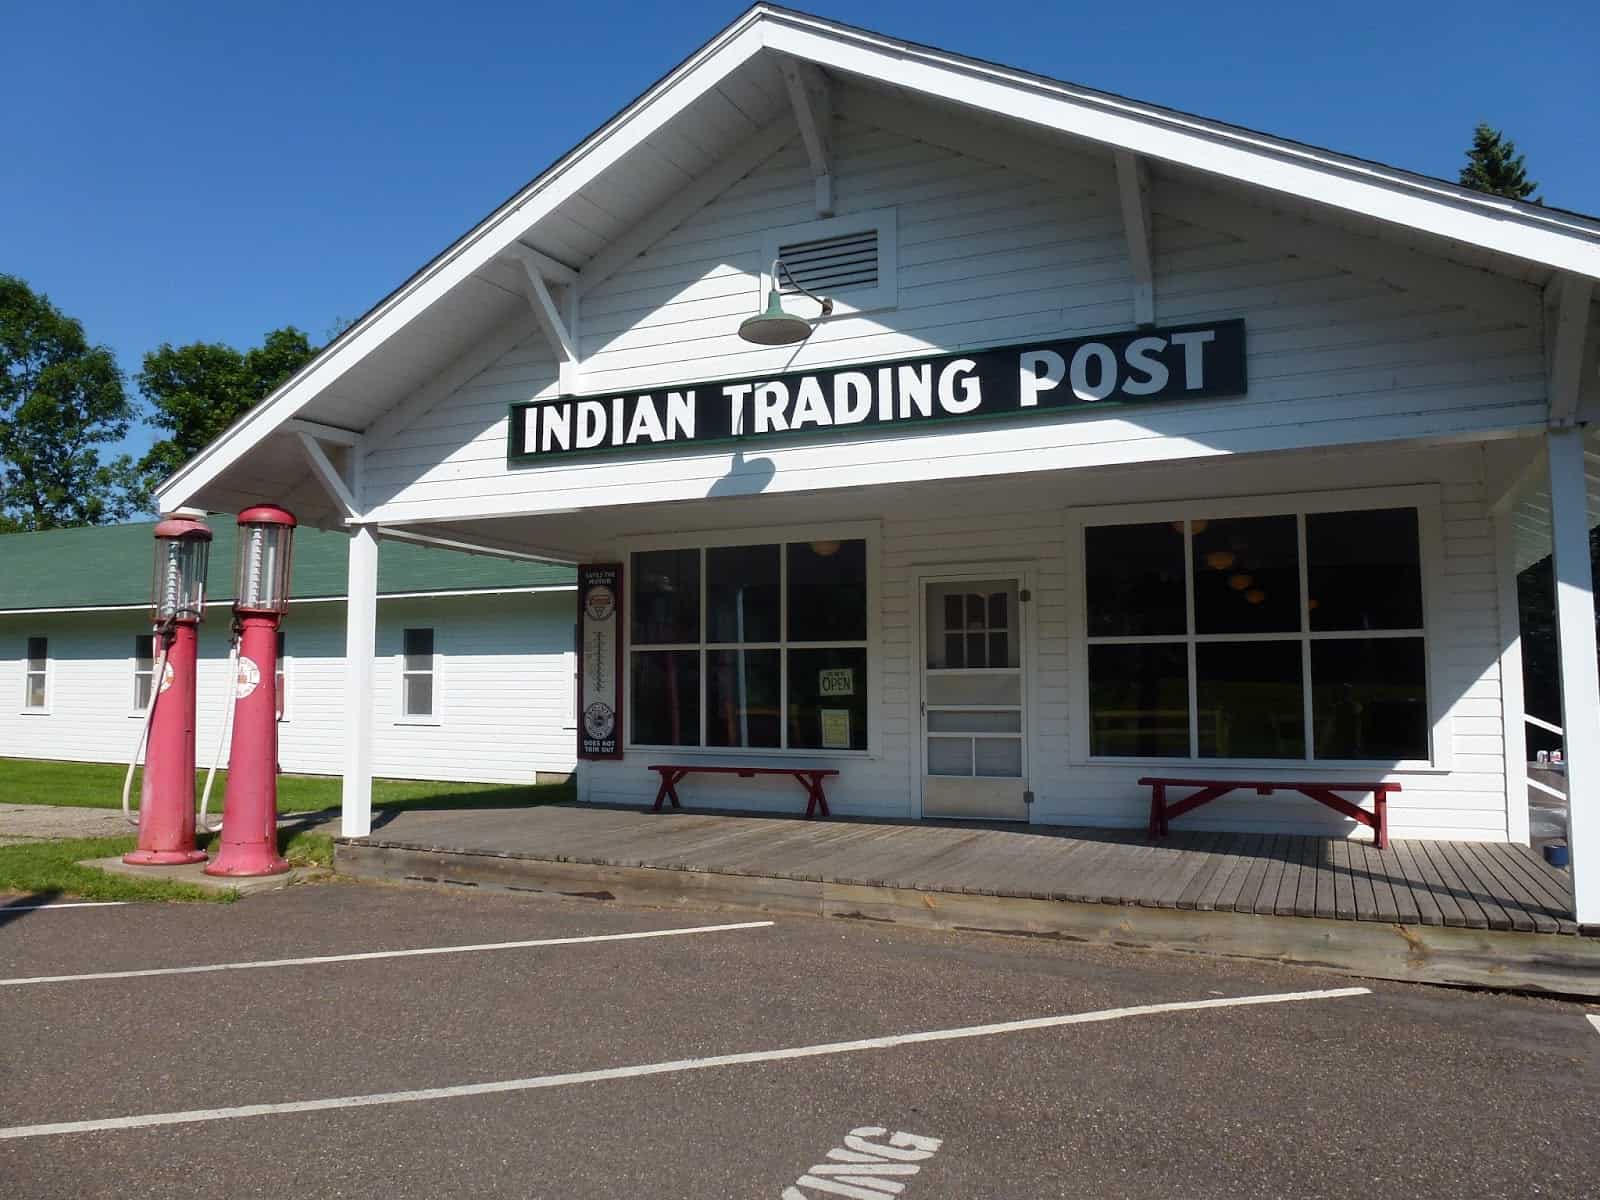 Mille Lacs Indian Trading Post in Minnesota